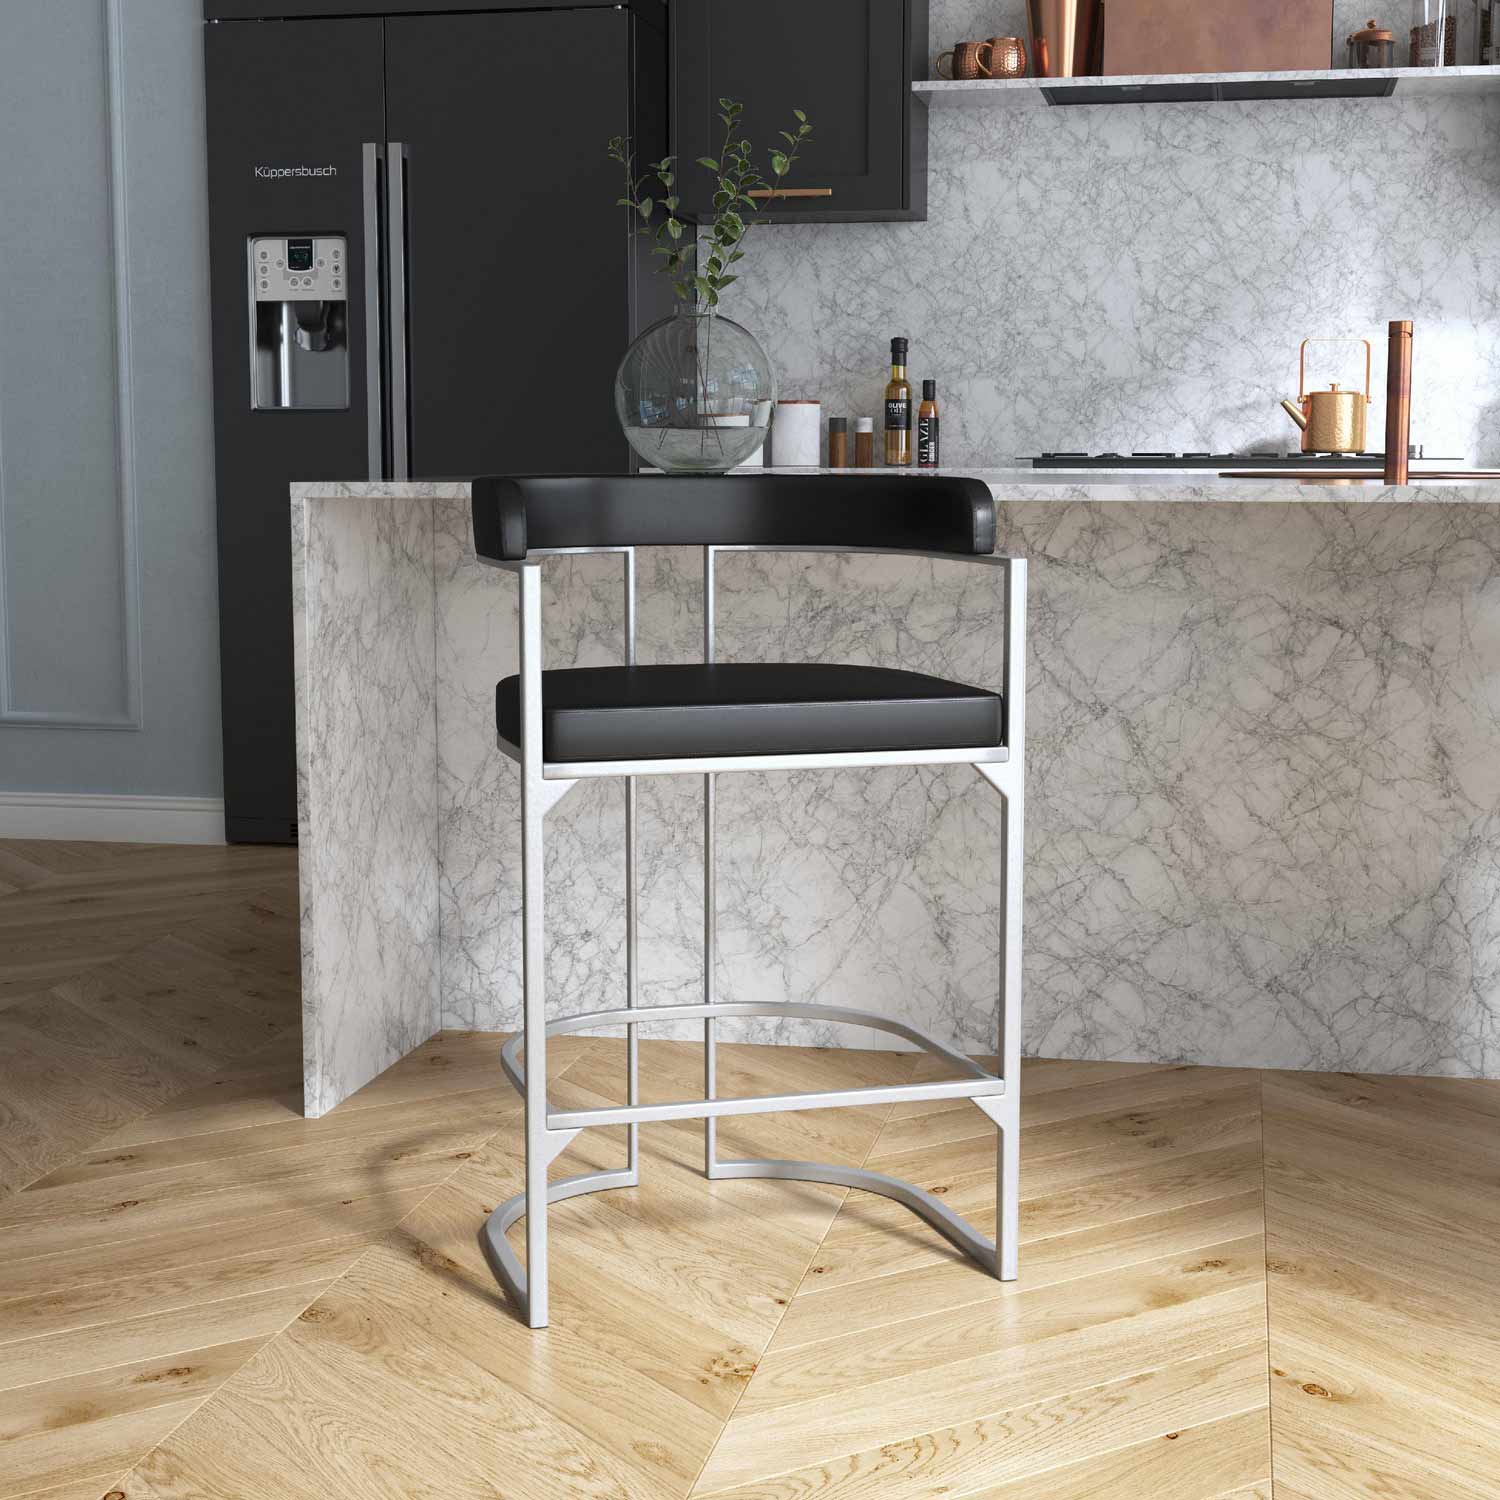 Hillsdale Cannonwood Half Moon Shape Metal and Upholstered Back Counter Height Stool - Silver